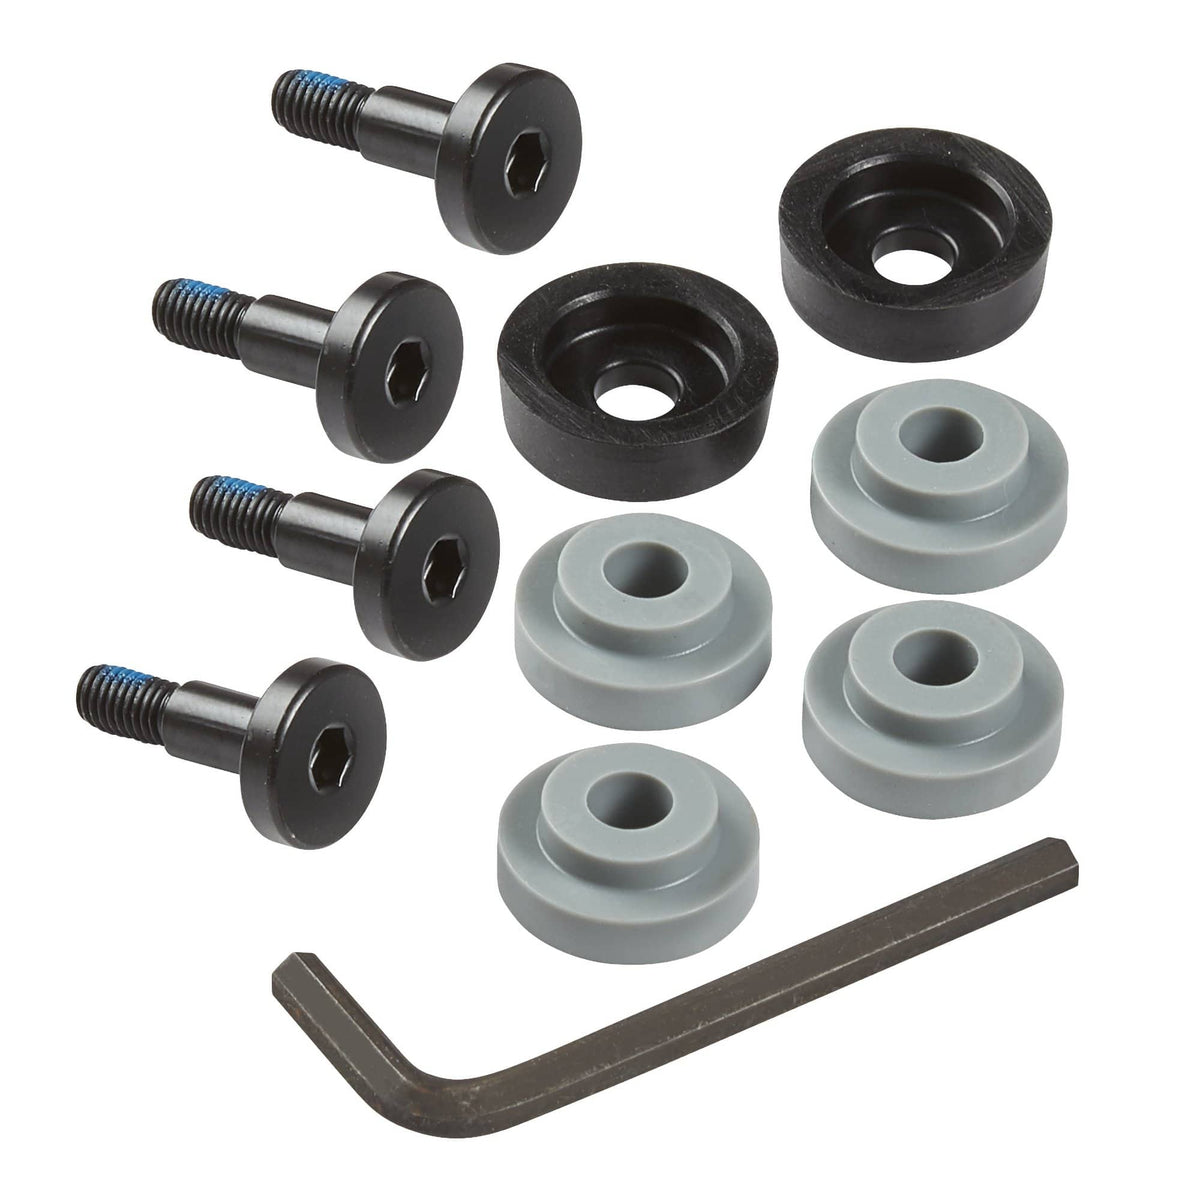 Boosted Rev Scooter Deck Screw Kit